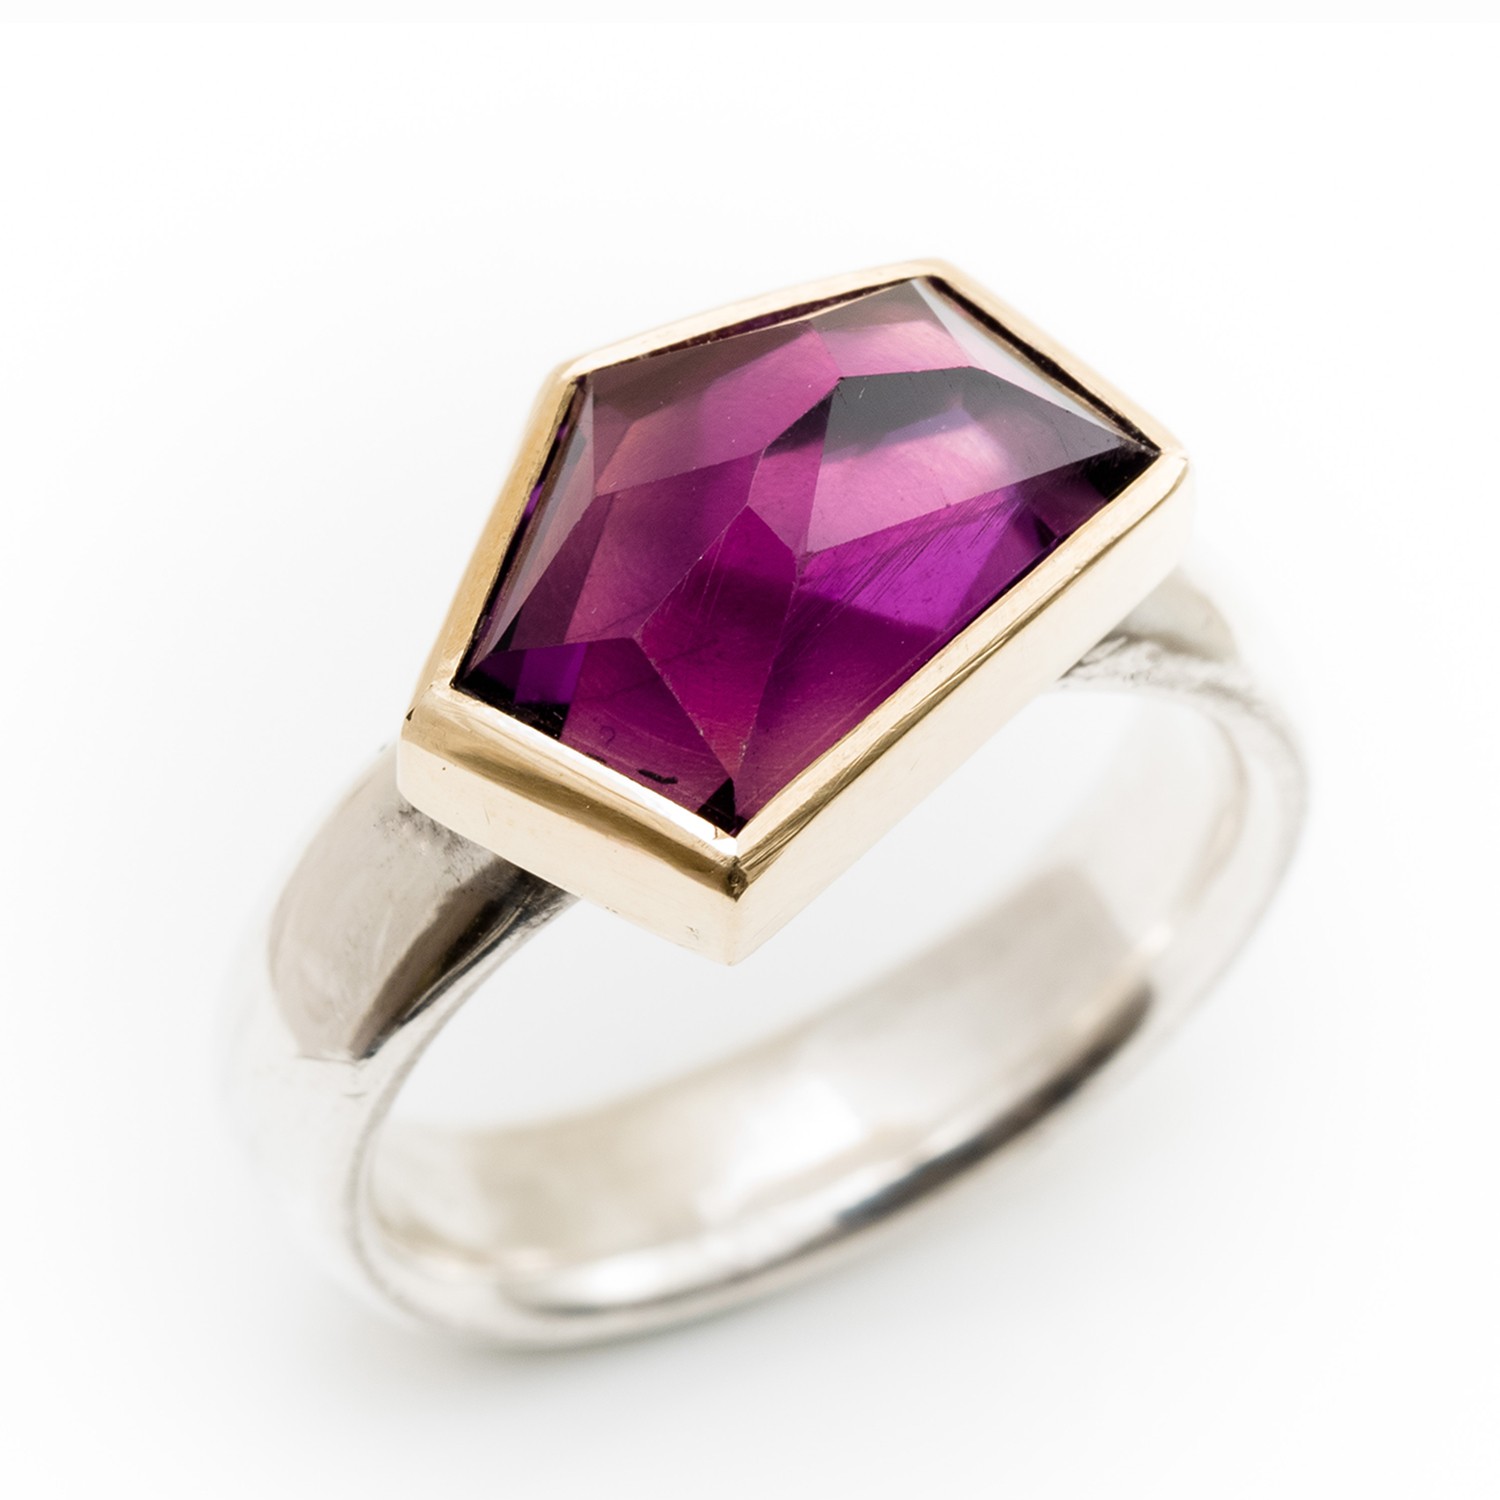 Geometric Amethyst gold and silver ring - Alice Robson Jewellery